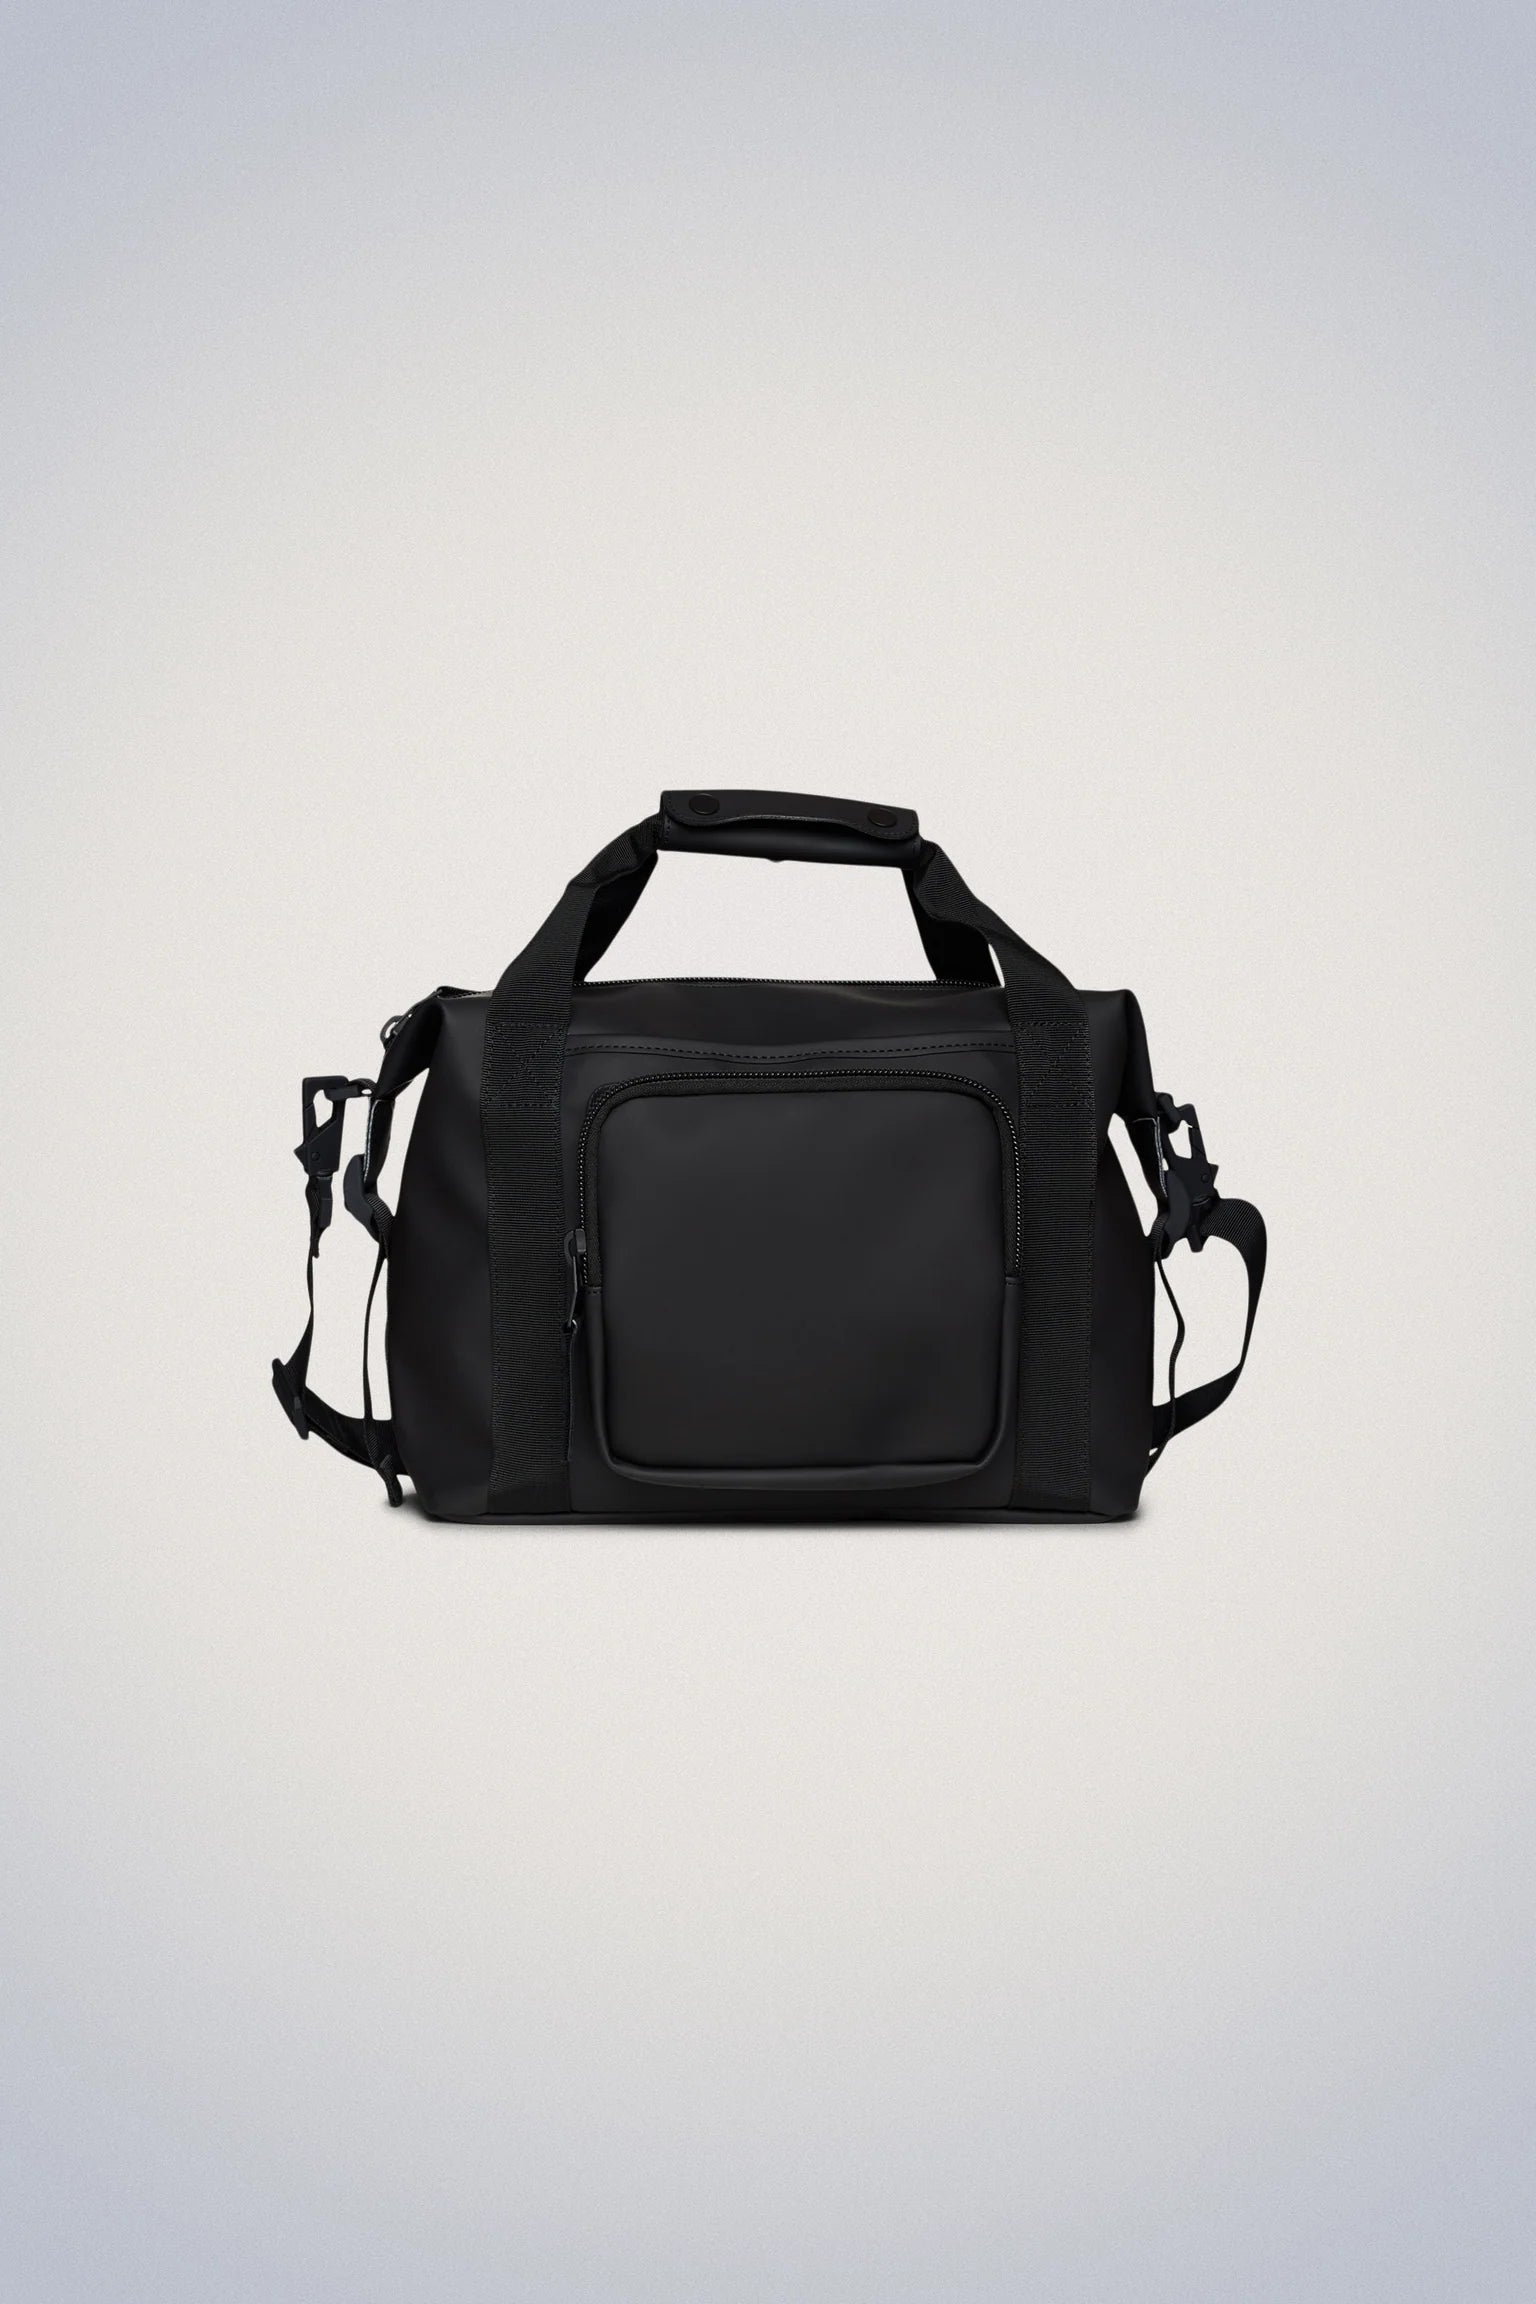 A Rains Texel Kit Bag - Black, a black duffel bag with a waterproof design on a white background.